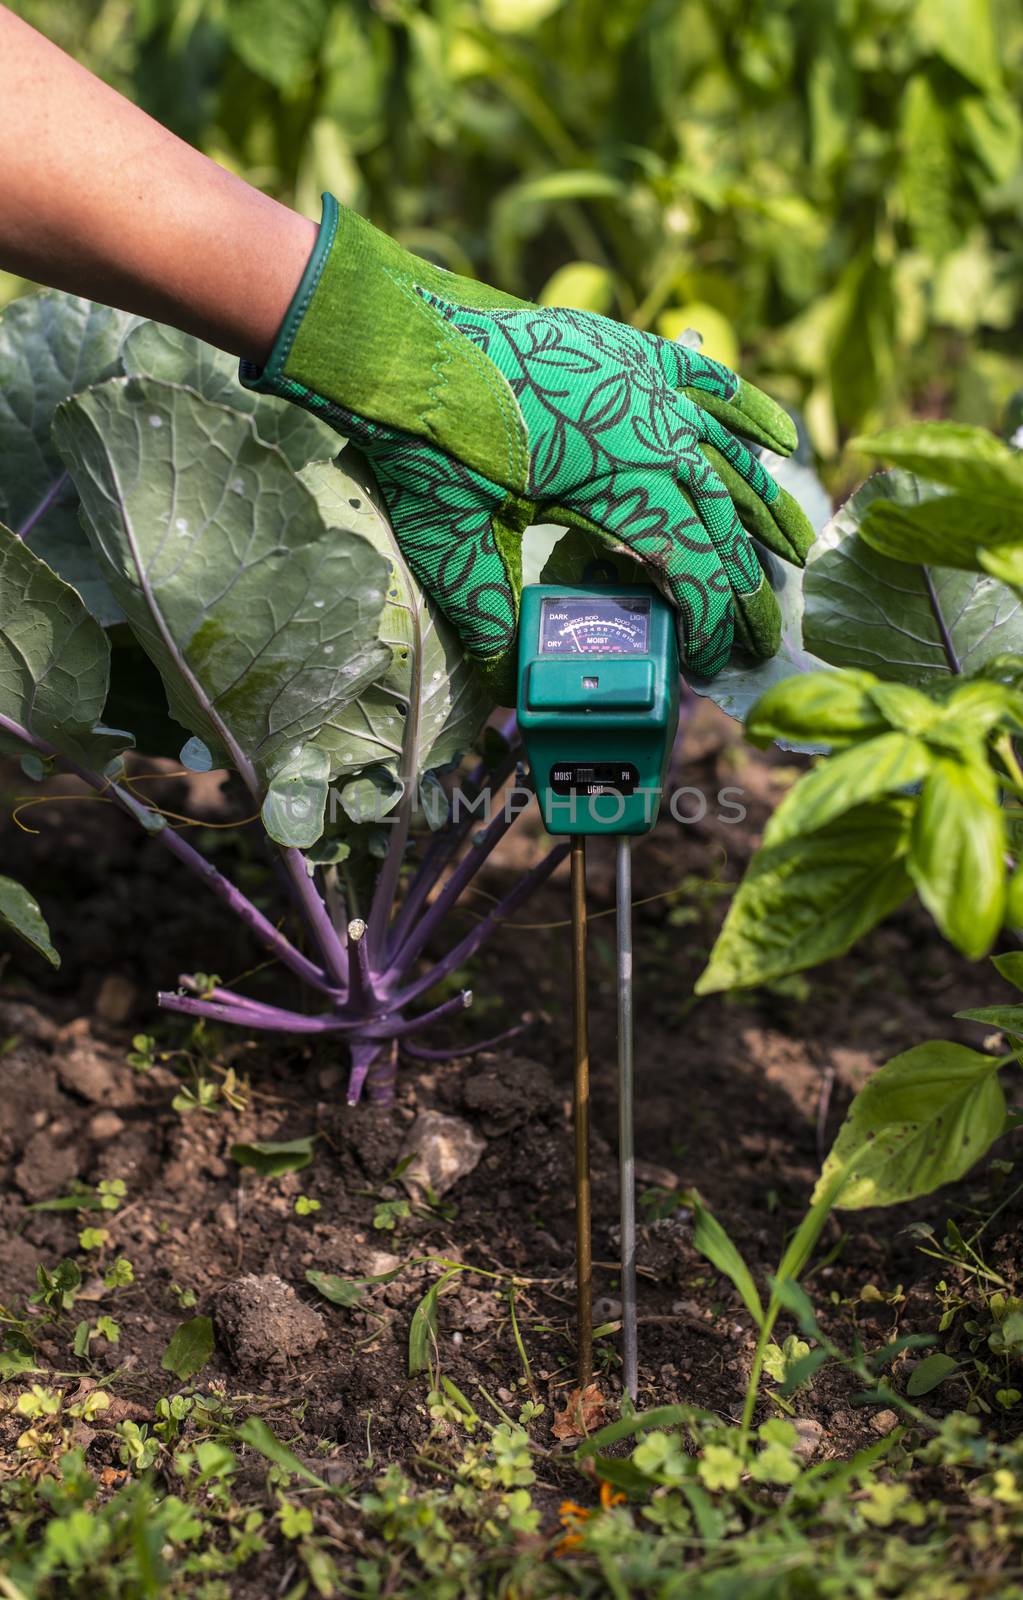 Moisture meter tester in soil. Measure soil for humidity, nitrogen and HP with digital device. Woman farmer in a garden. Concept for new technology in the agriculture.